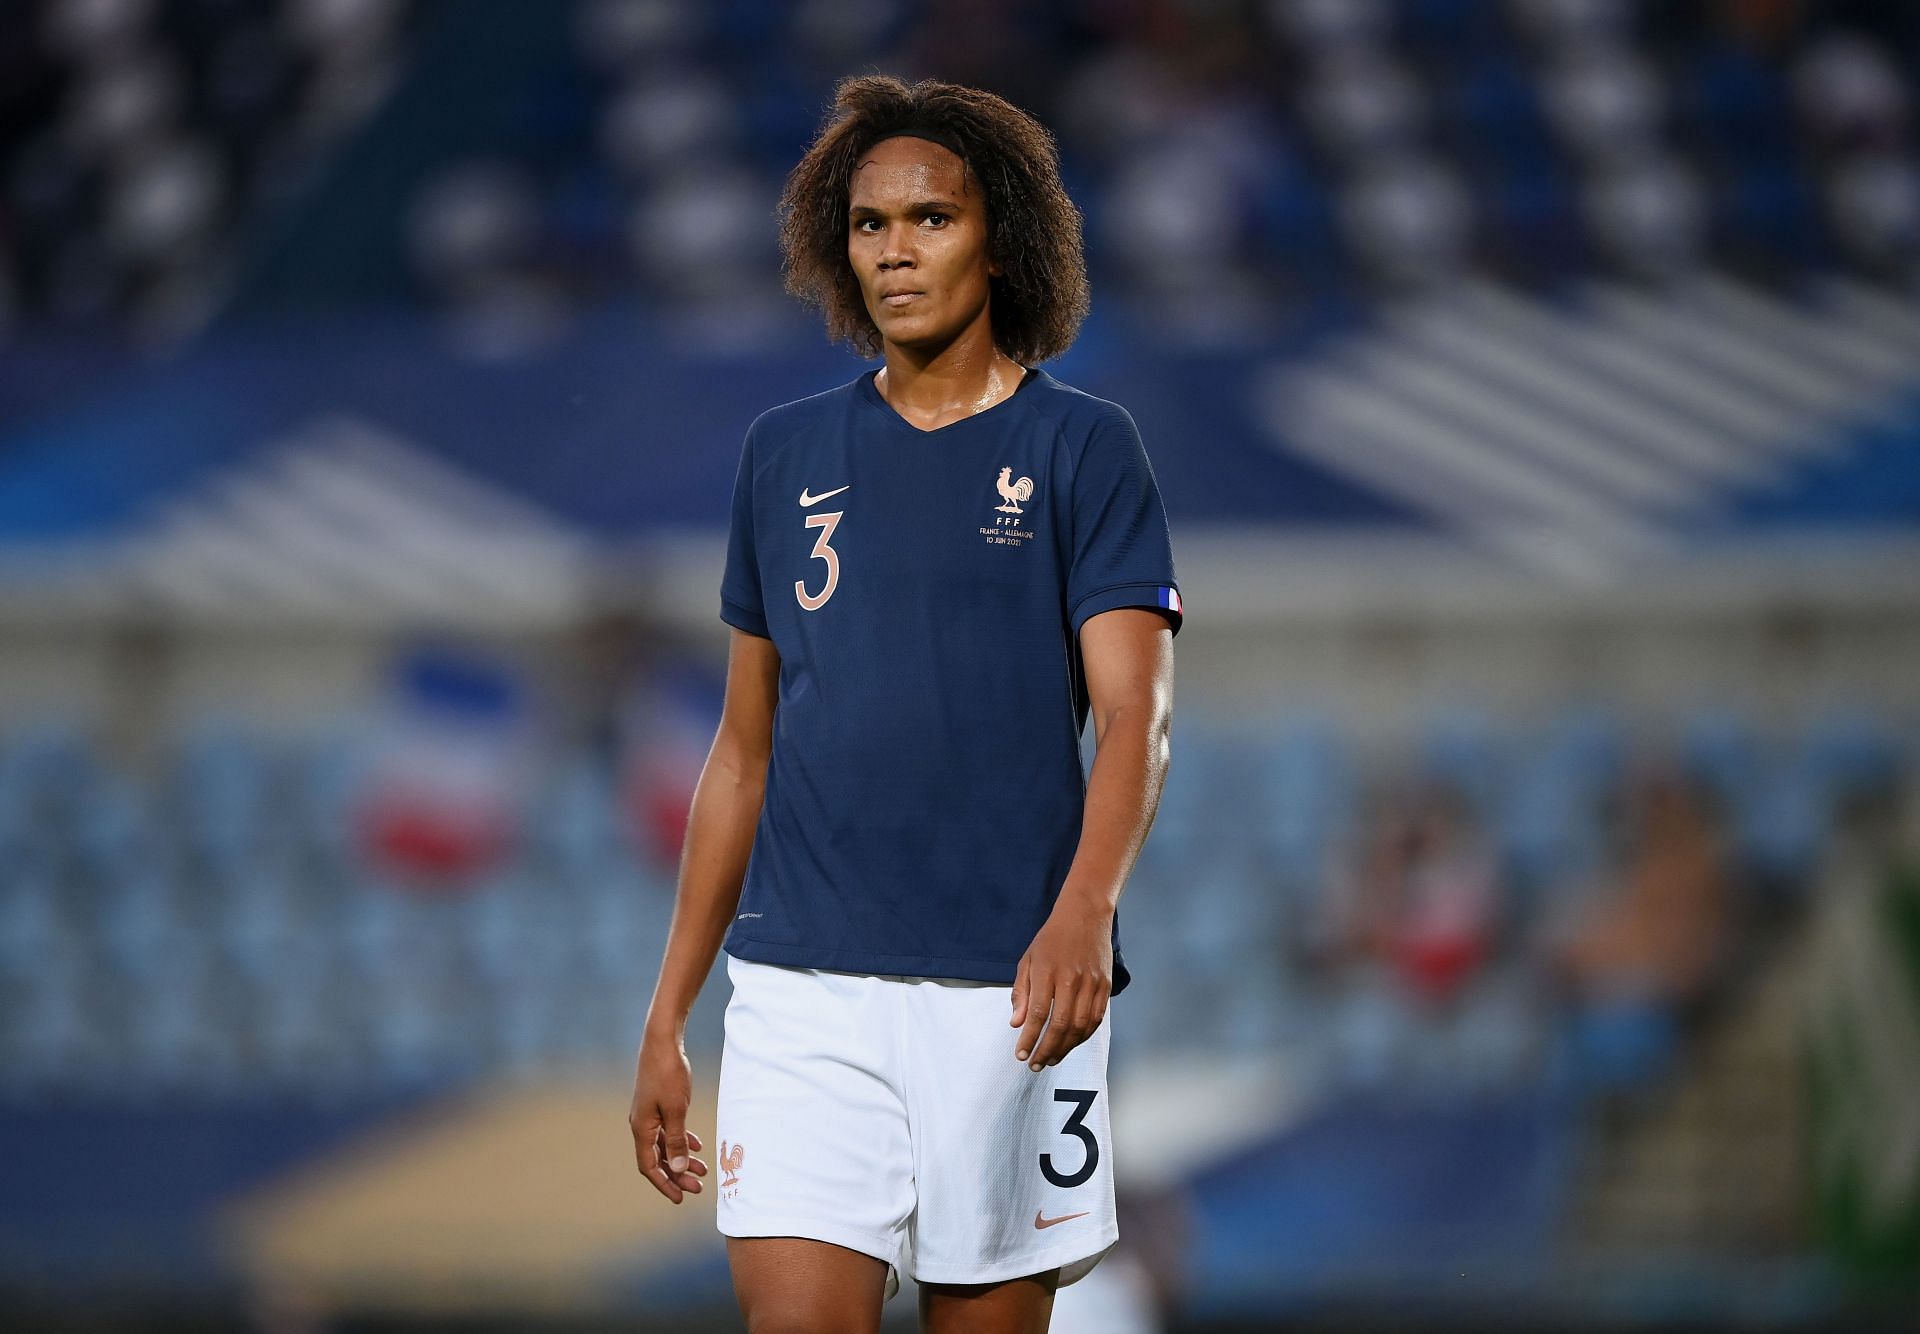 France Women will face the Netherlands Women on Tuesday